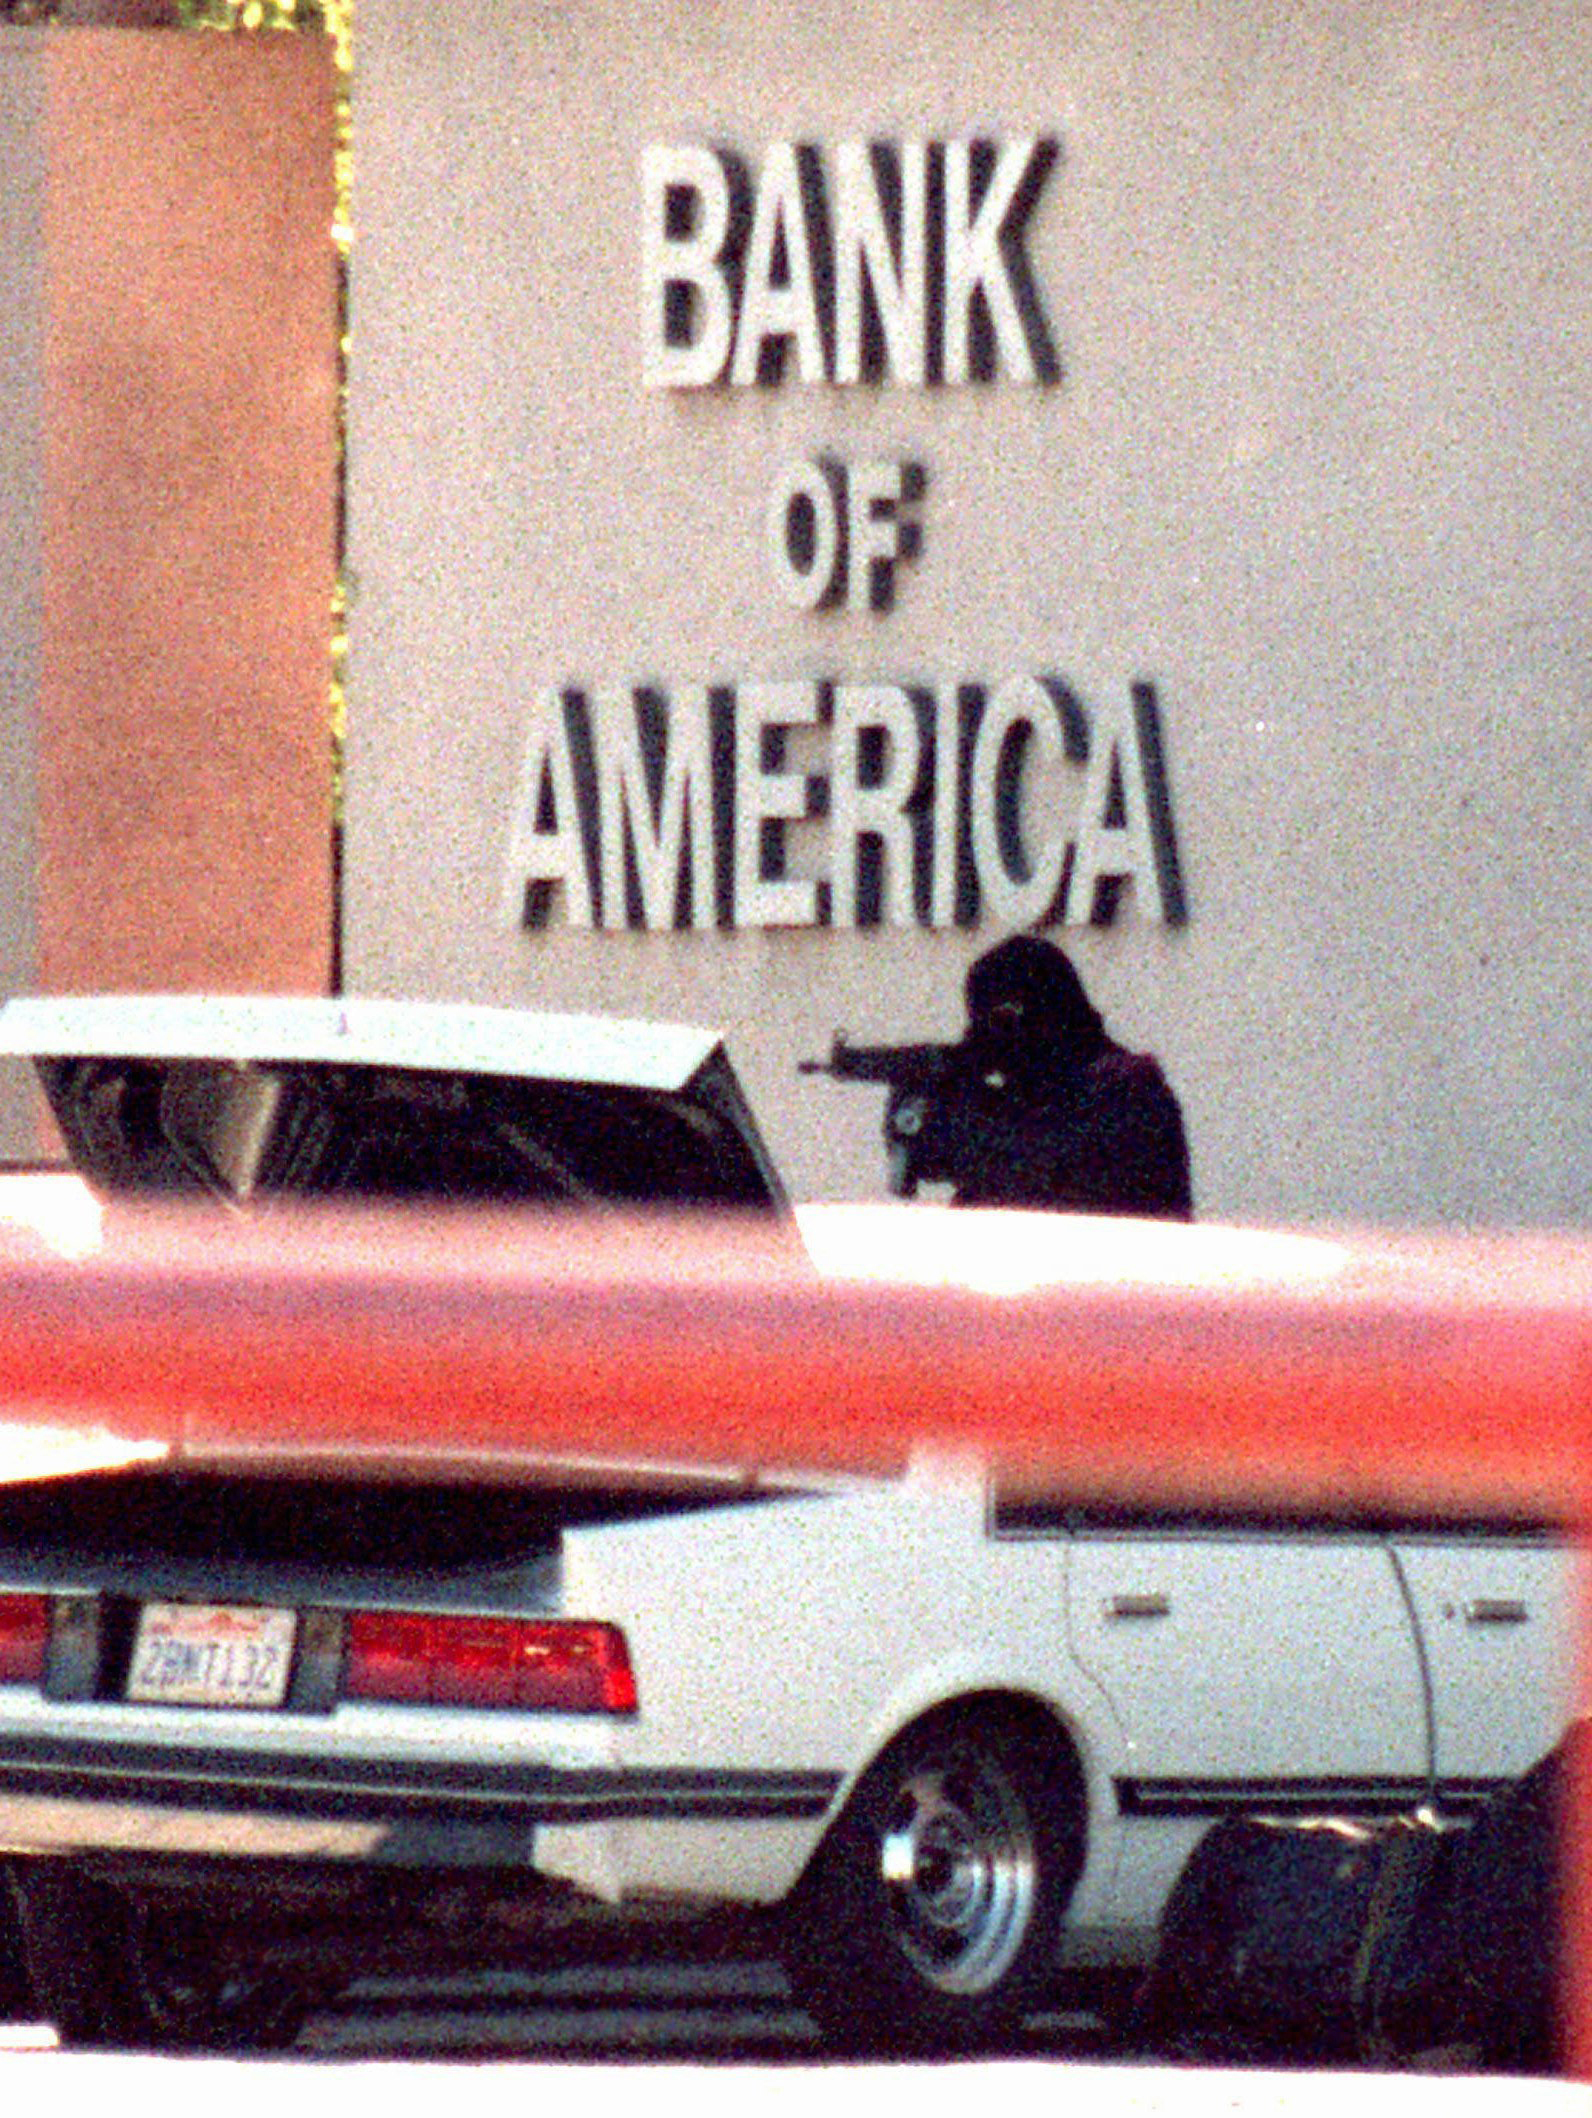 One of the bank robbers fires at LAPD officers with an illegally modified assault rifle.